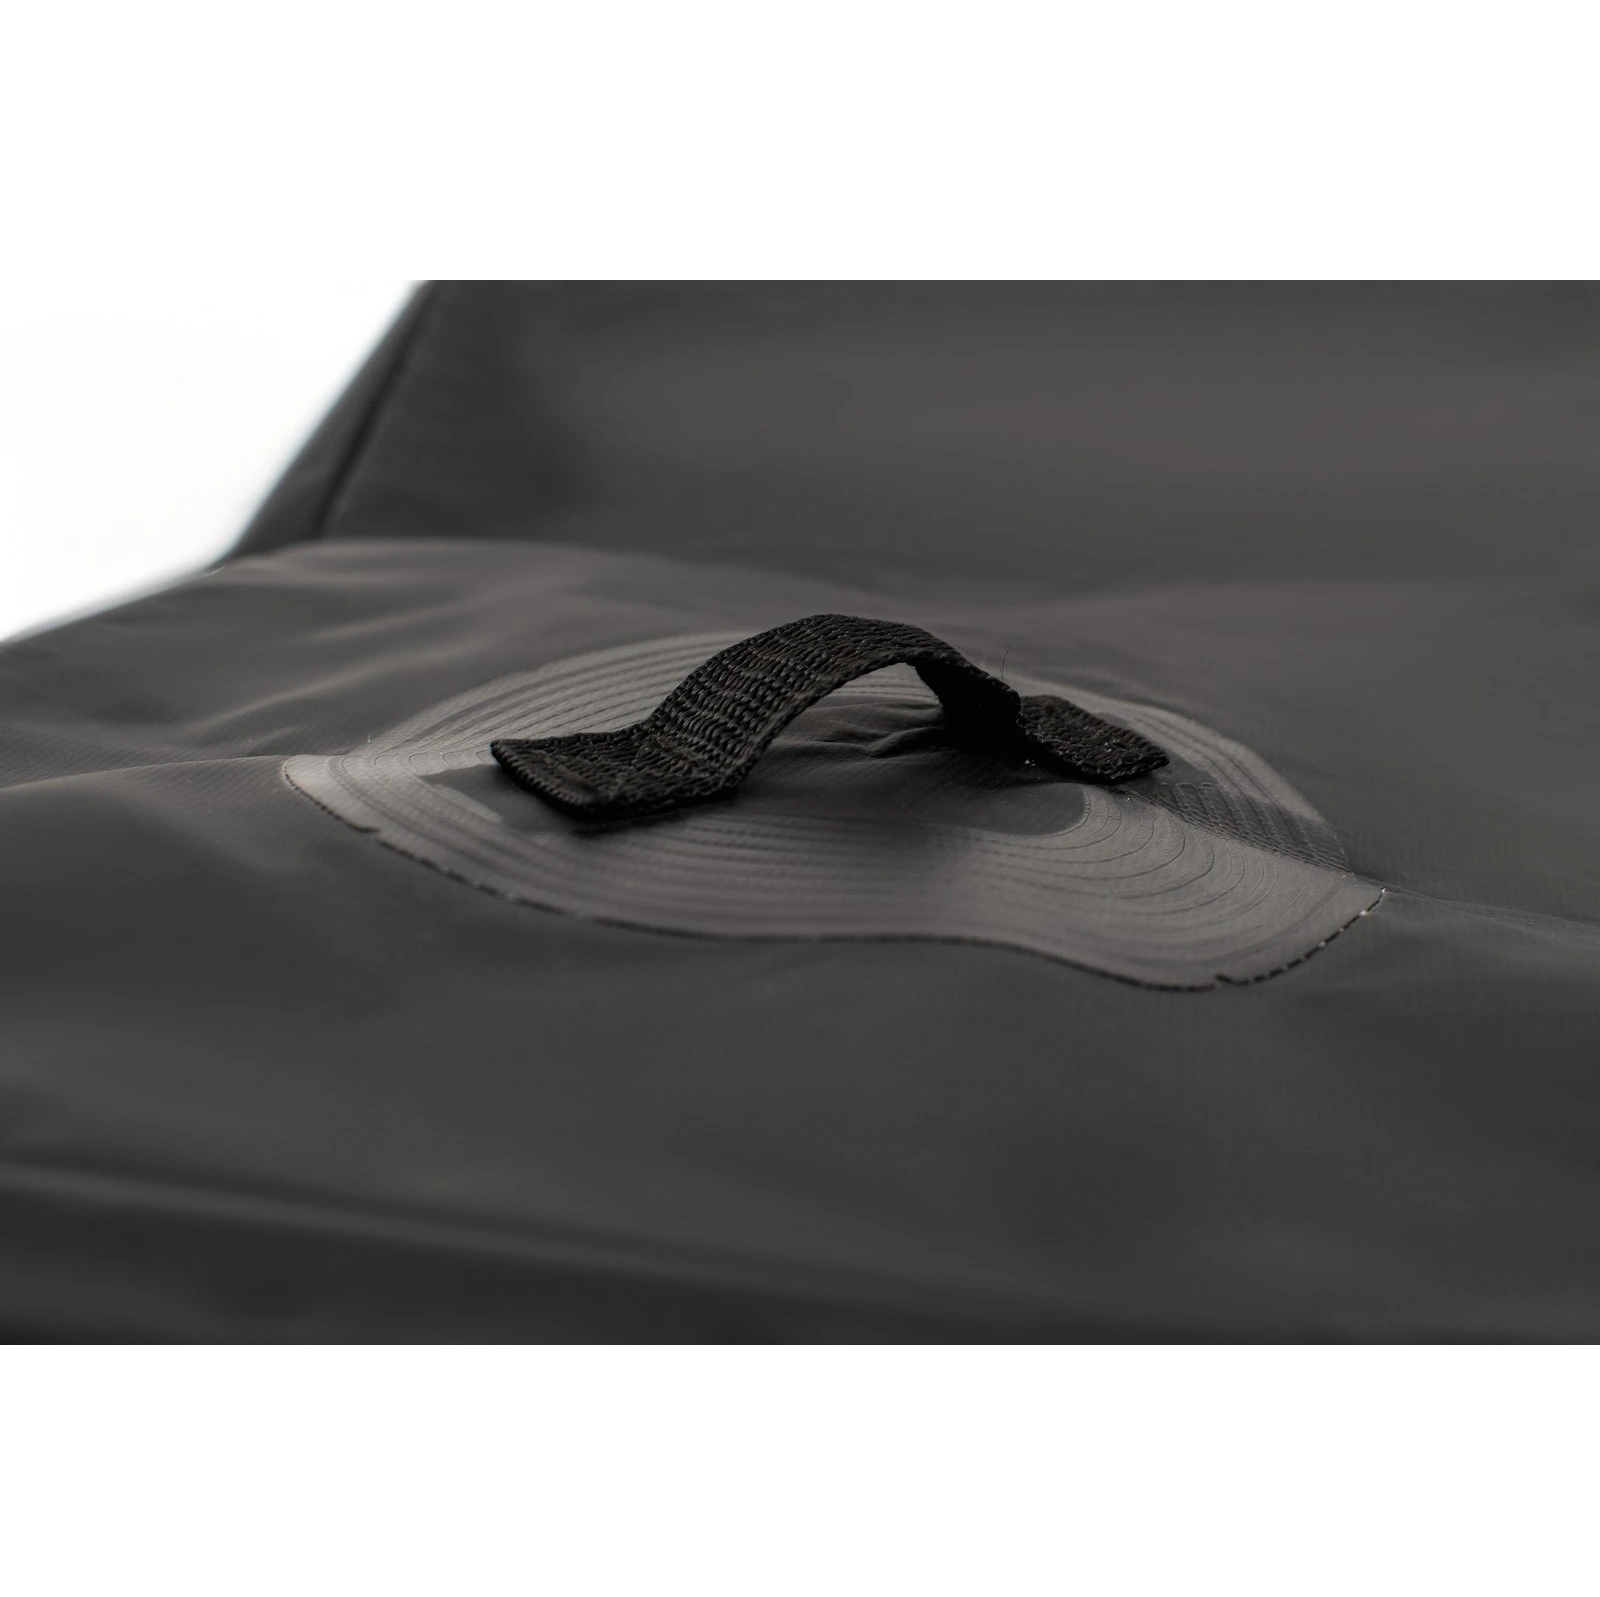 Wholesale Quality Car Top Bag Soft-Sided Rain Proof Bag, Waterproof Car Accessories Contact us for Best Price